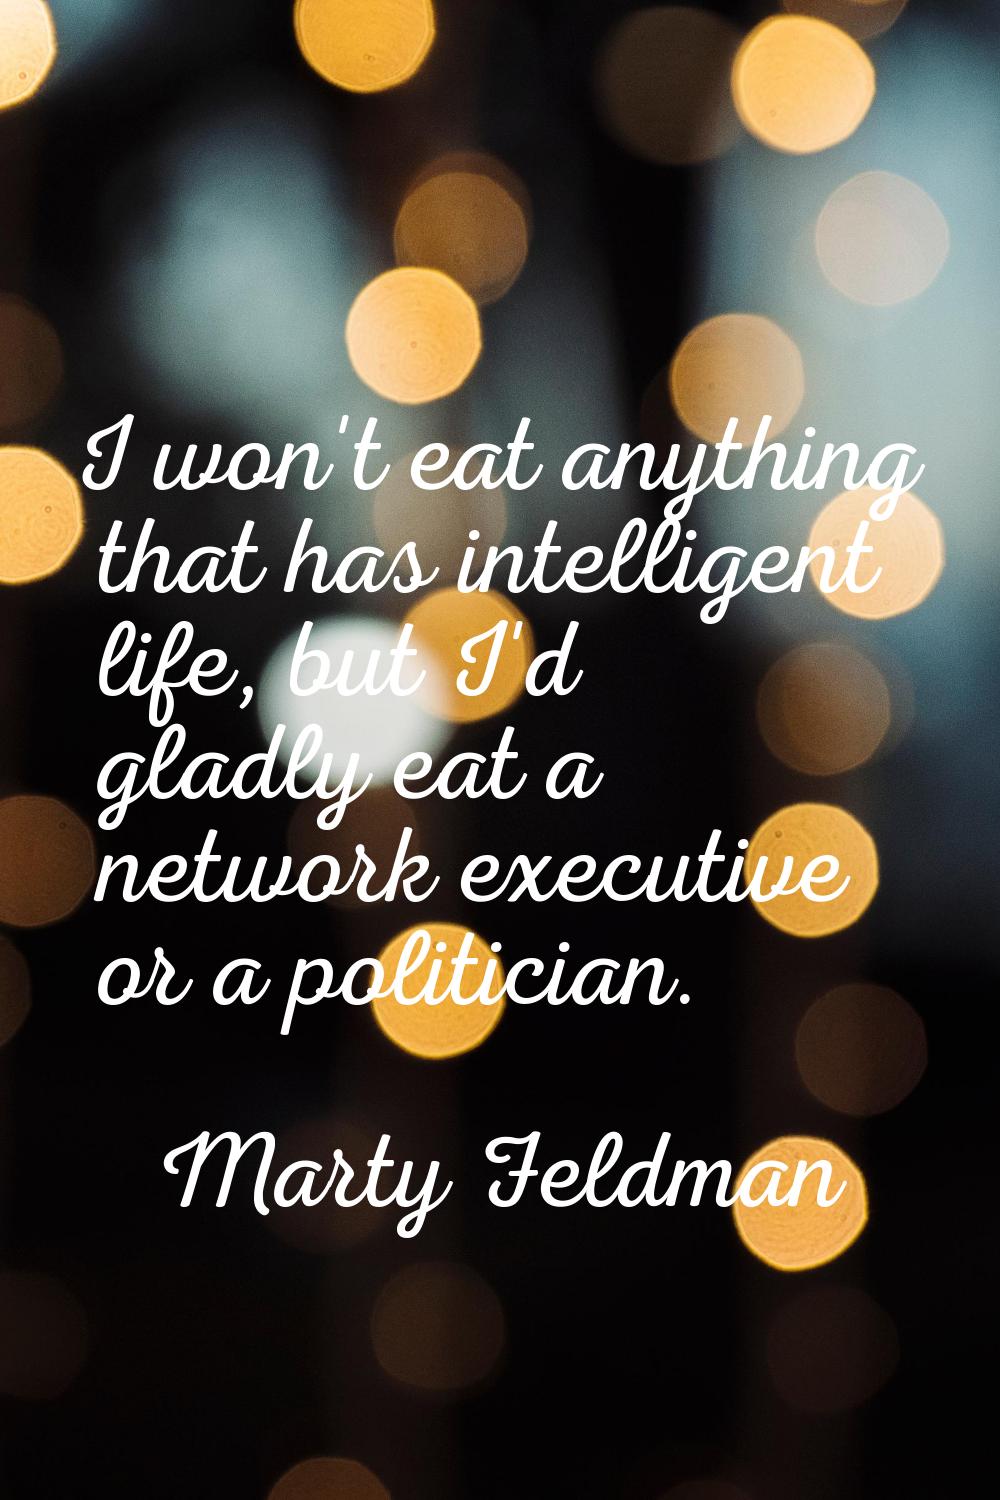 I won't eat anything that has intelligent life, but I'd gladly eat a network executive or a politic